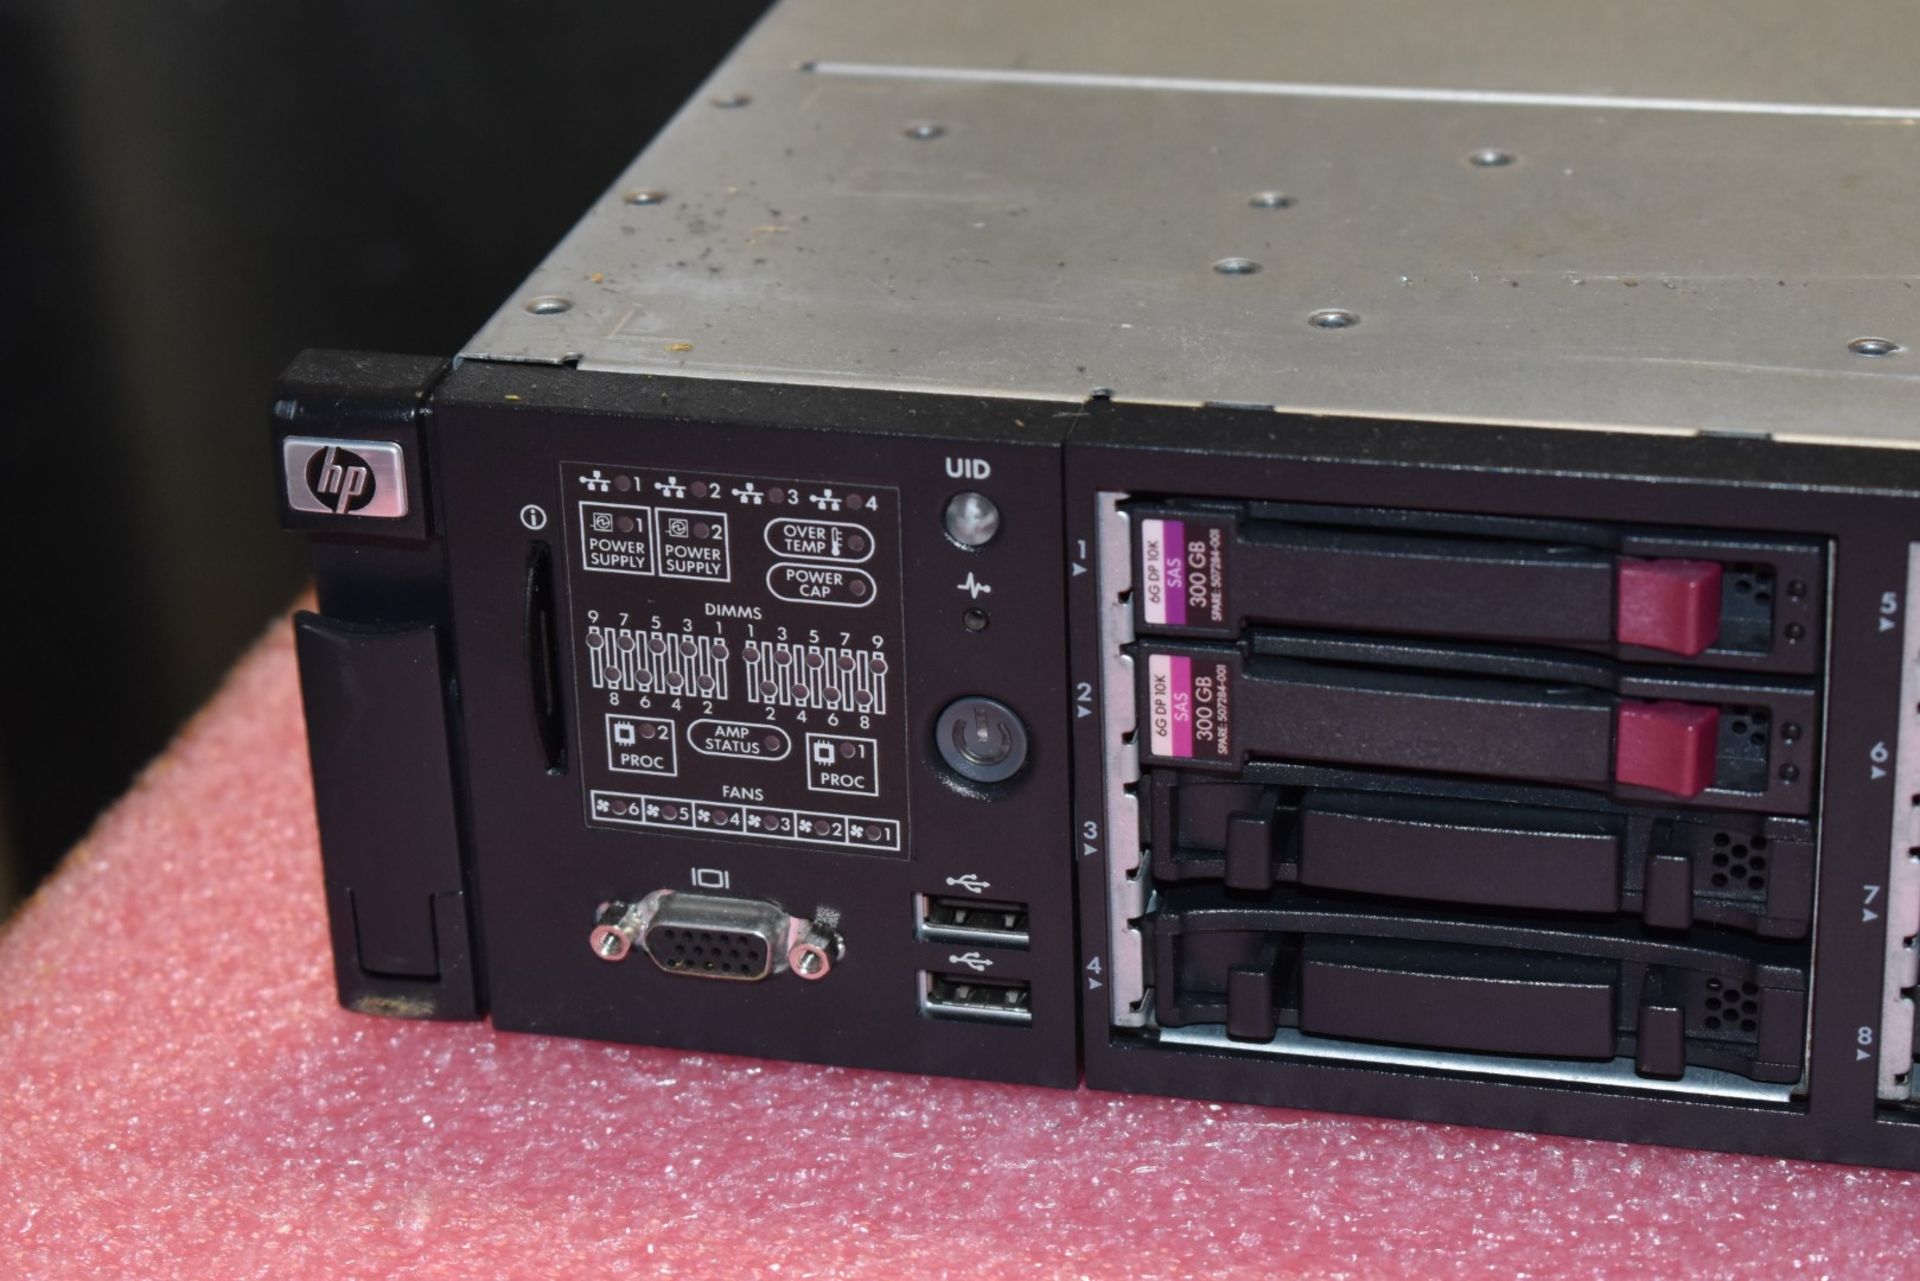 1 x HP ProLiant DL380 G7 Server With 2 x Intel Xeon X5650 Six Core 3.06ghz Processors and 92gb Ram - - Image 5 of 8